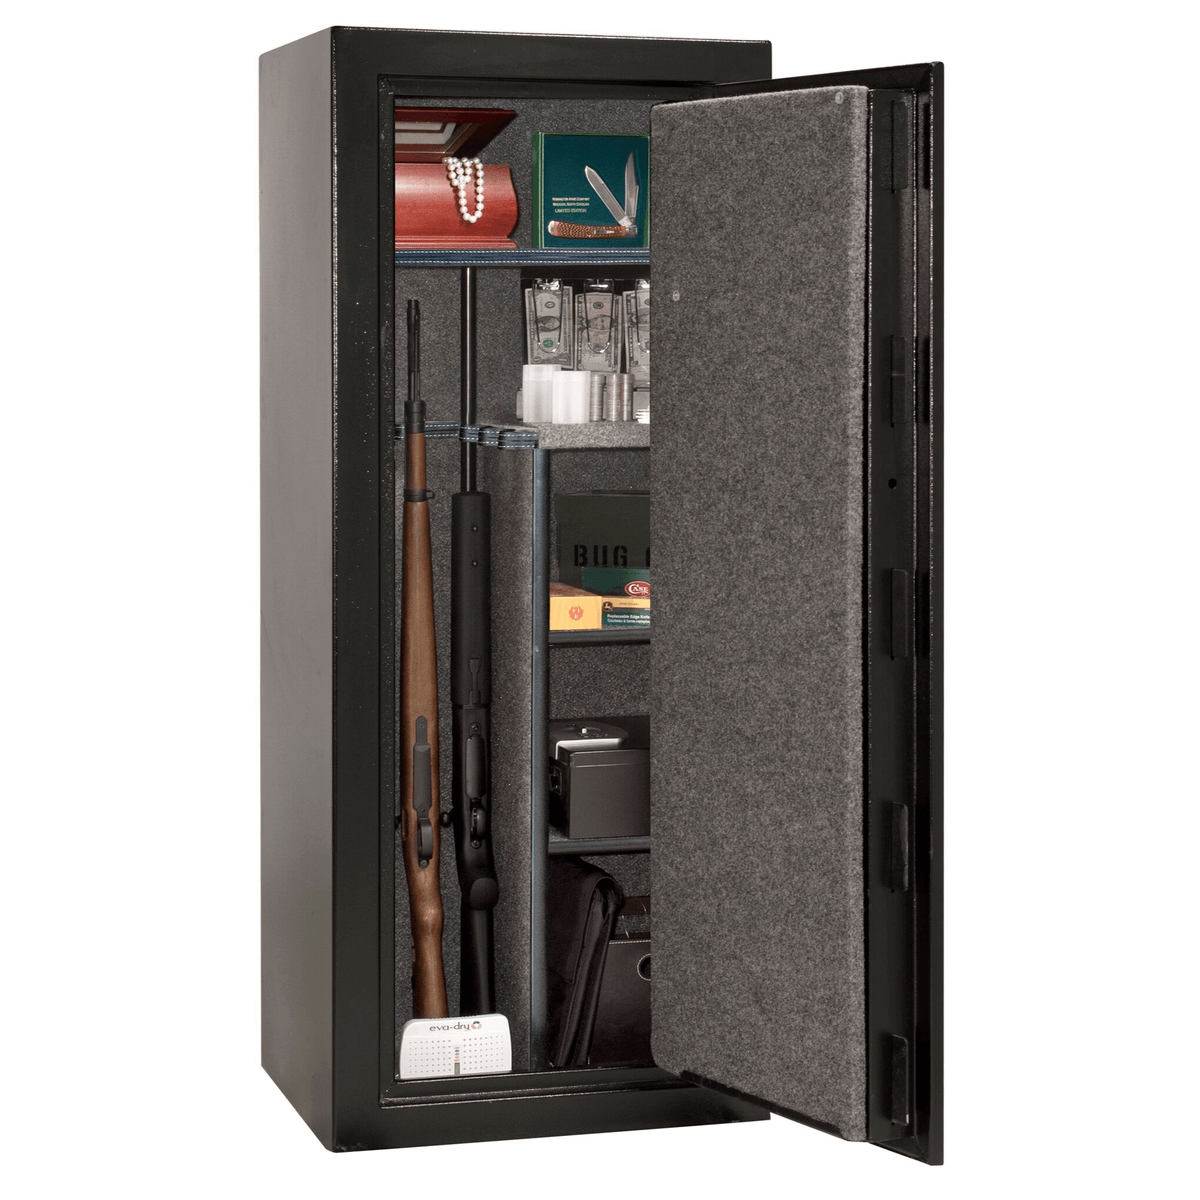 Open CENTURION 18 Safe in Textured Black with Black Electronic Lock, open.